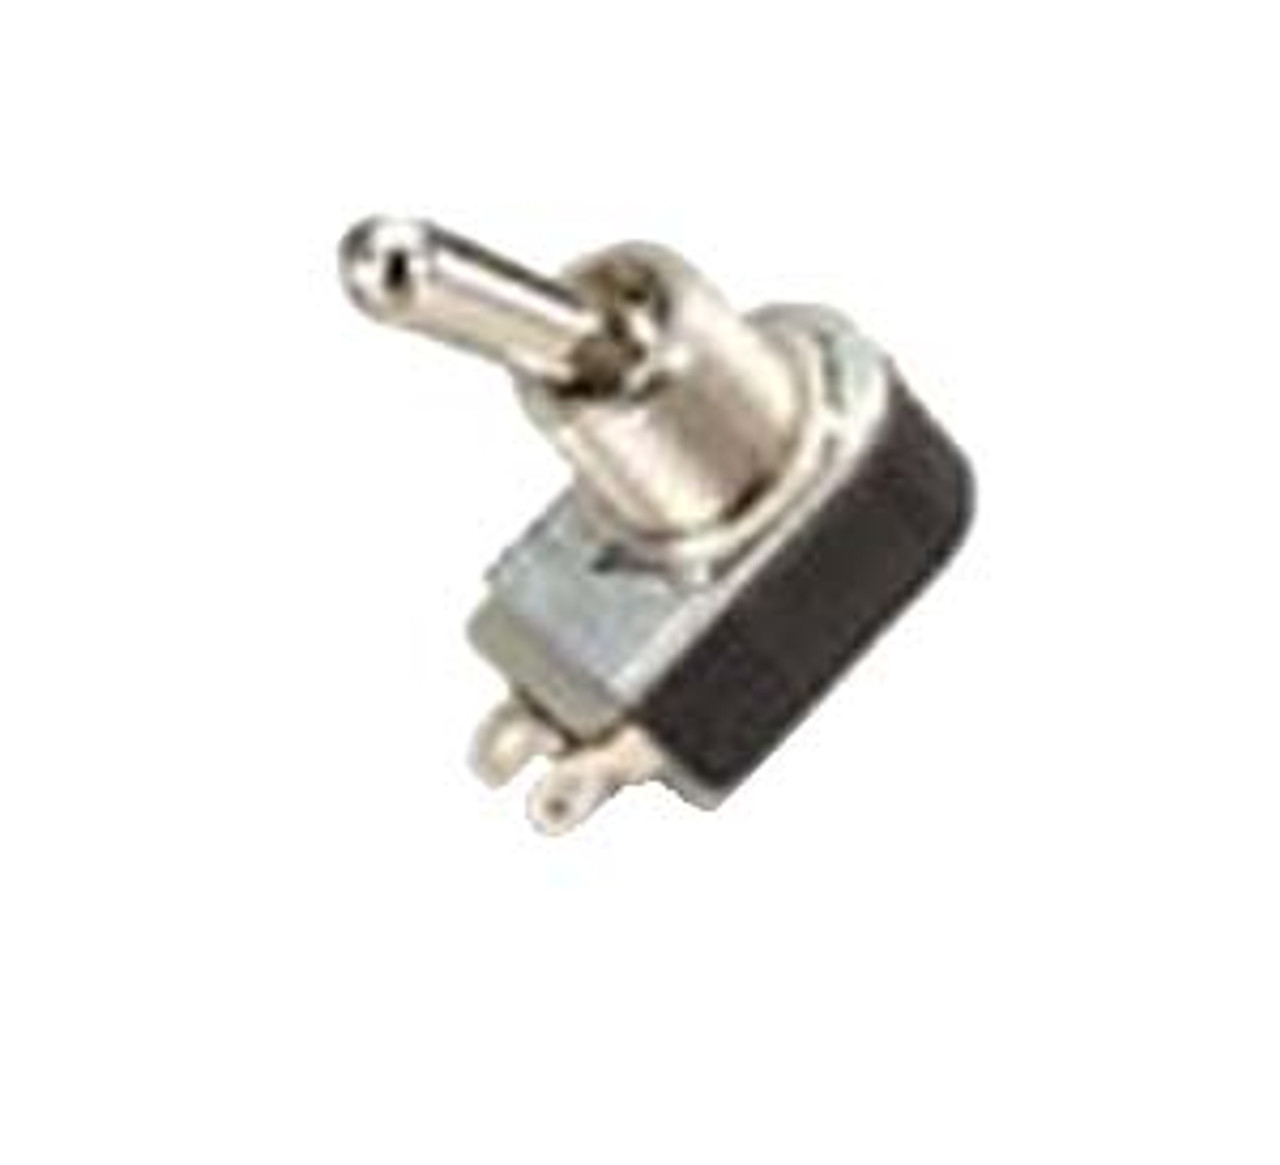 Selecta SS204-4-BG - SPST ON-OFF, 6 Amp Toggle Switch